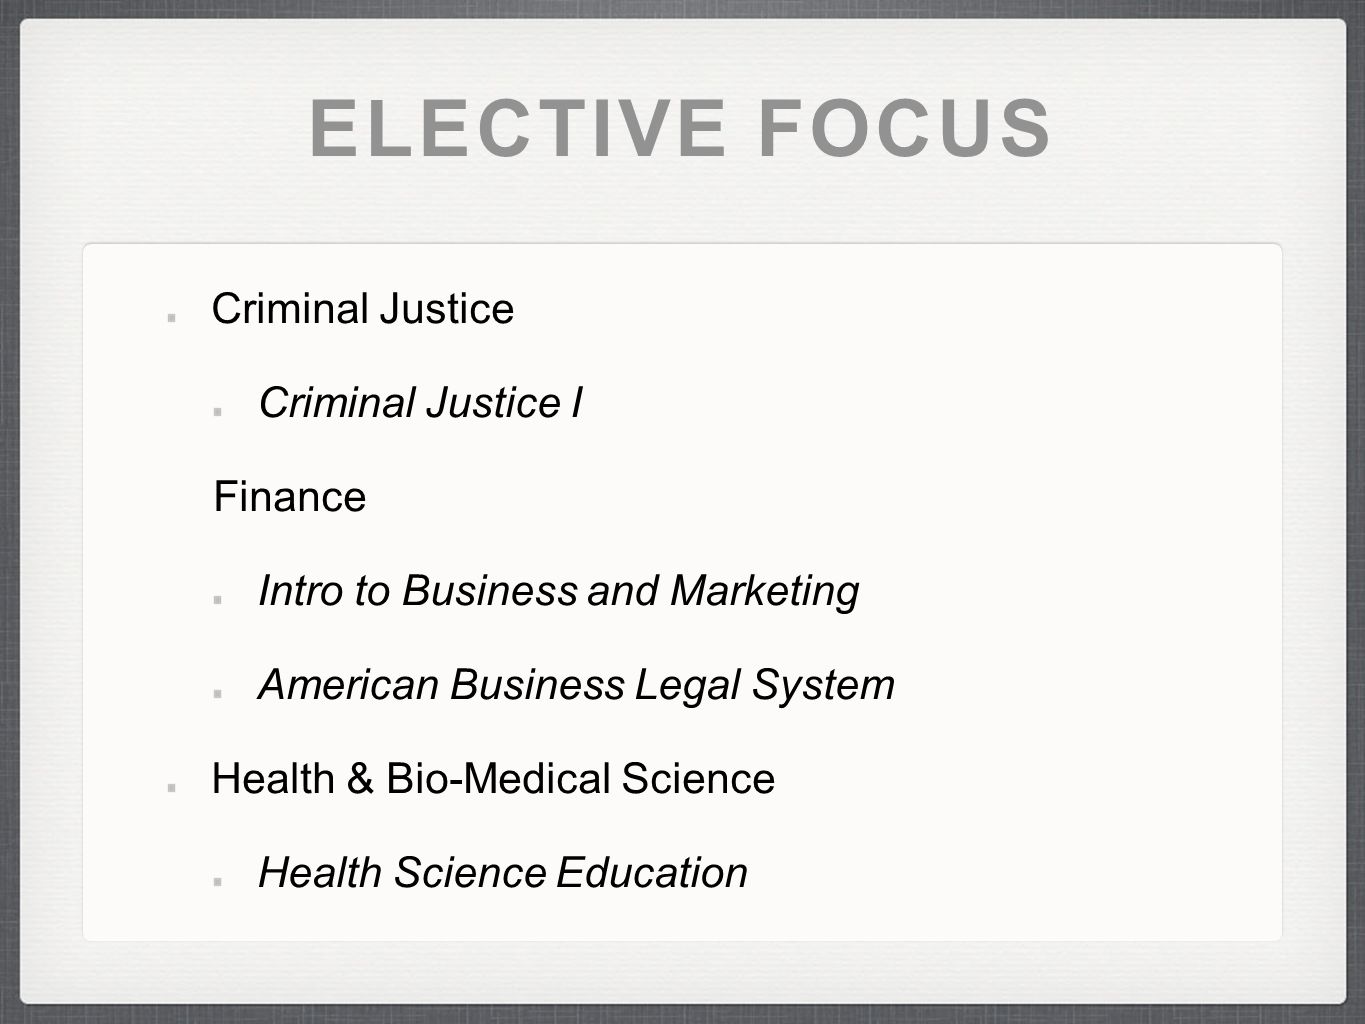 ELECTIVE FOCUS Criminal Justice Criminal Justice I Finance Intro to Business and Marketing American Business Legal System Health & Bio-Medical Science Health Science Education